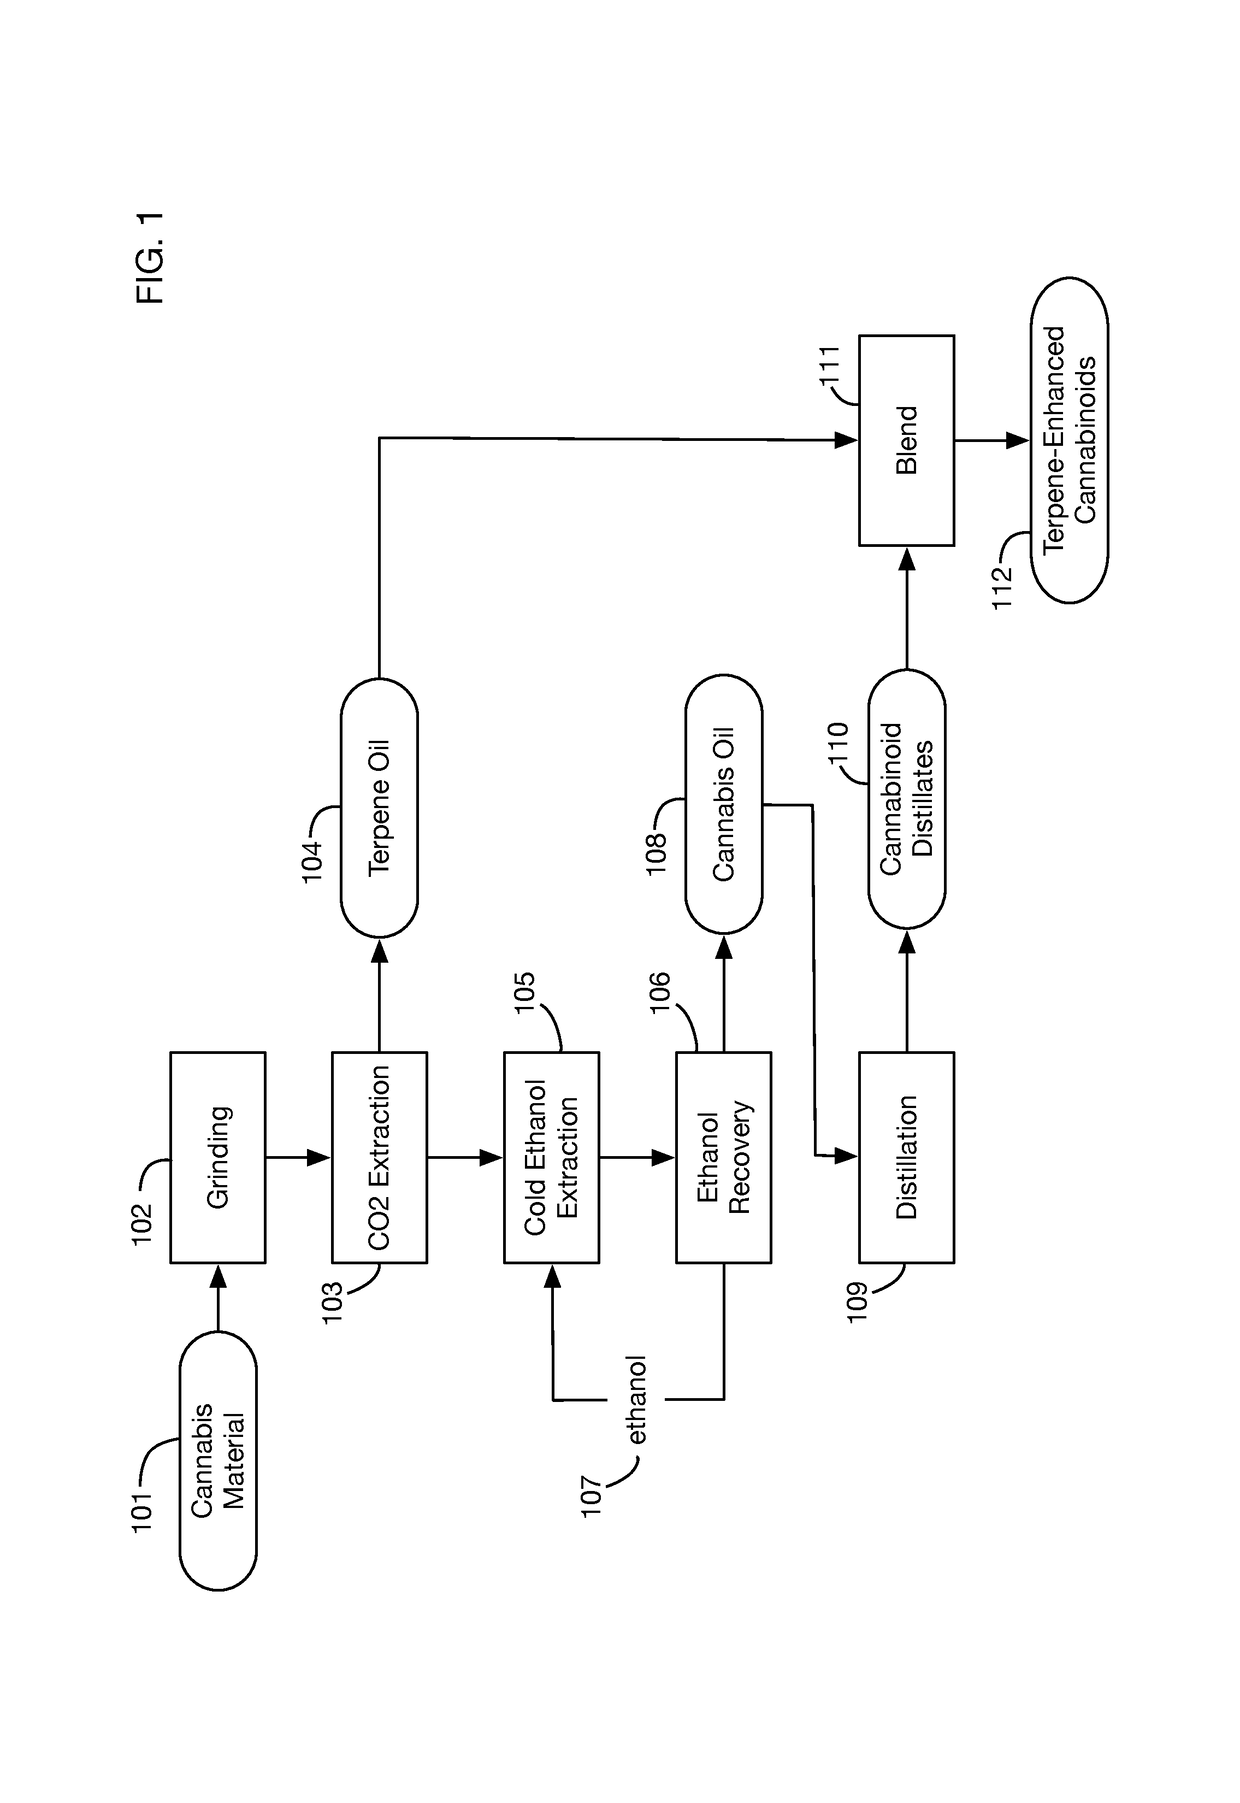 Method for removing contaminants from cannabinoid distillates